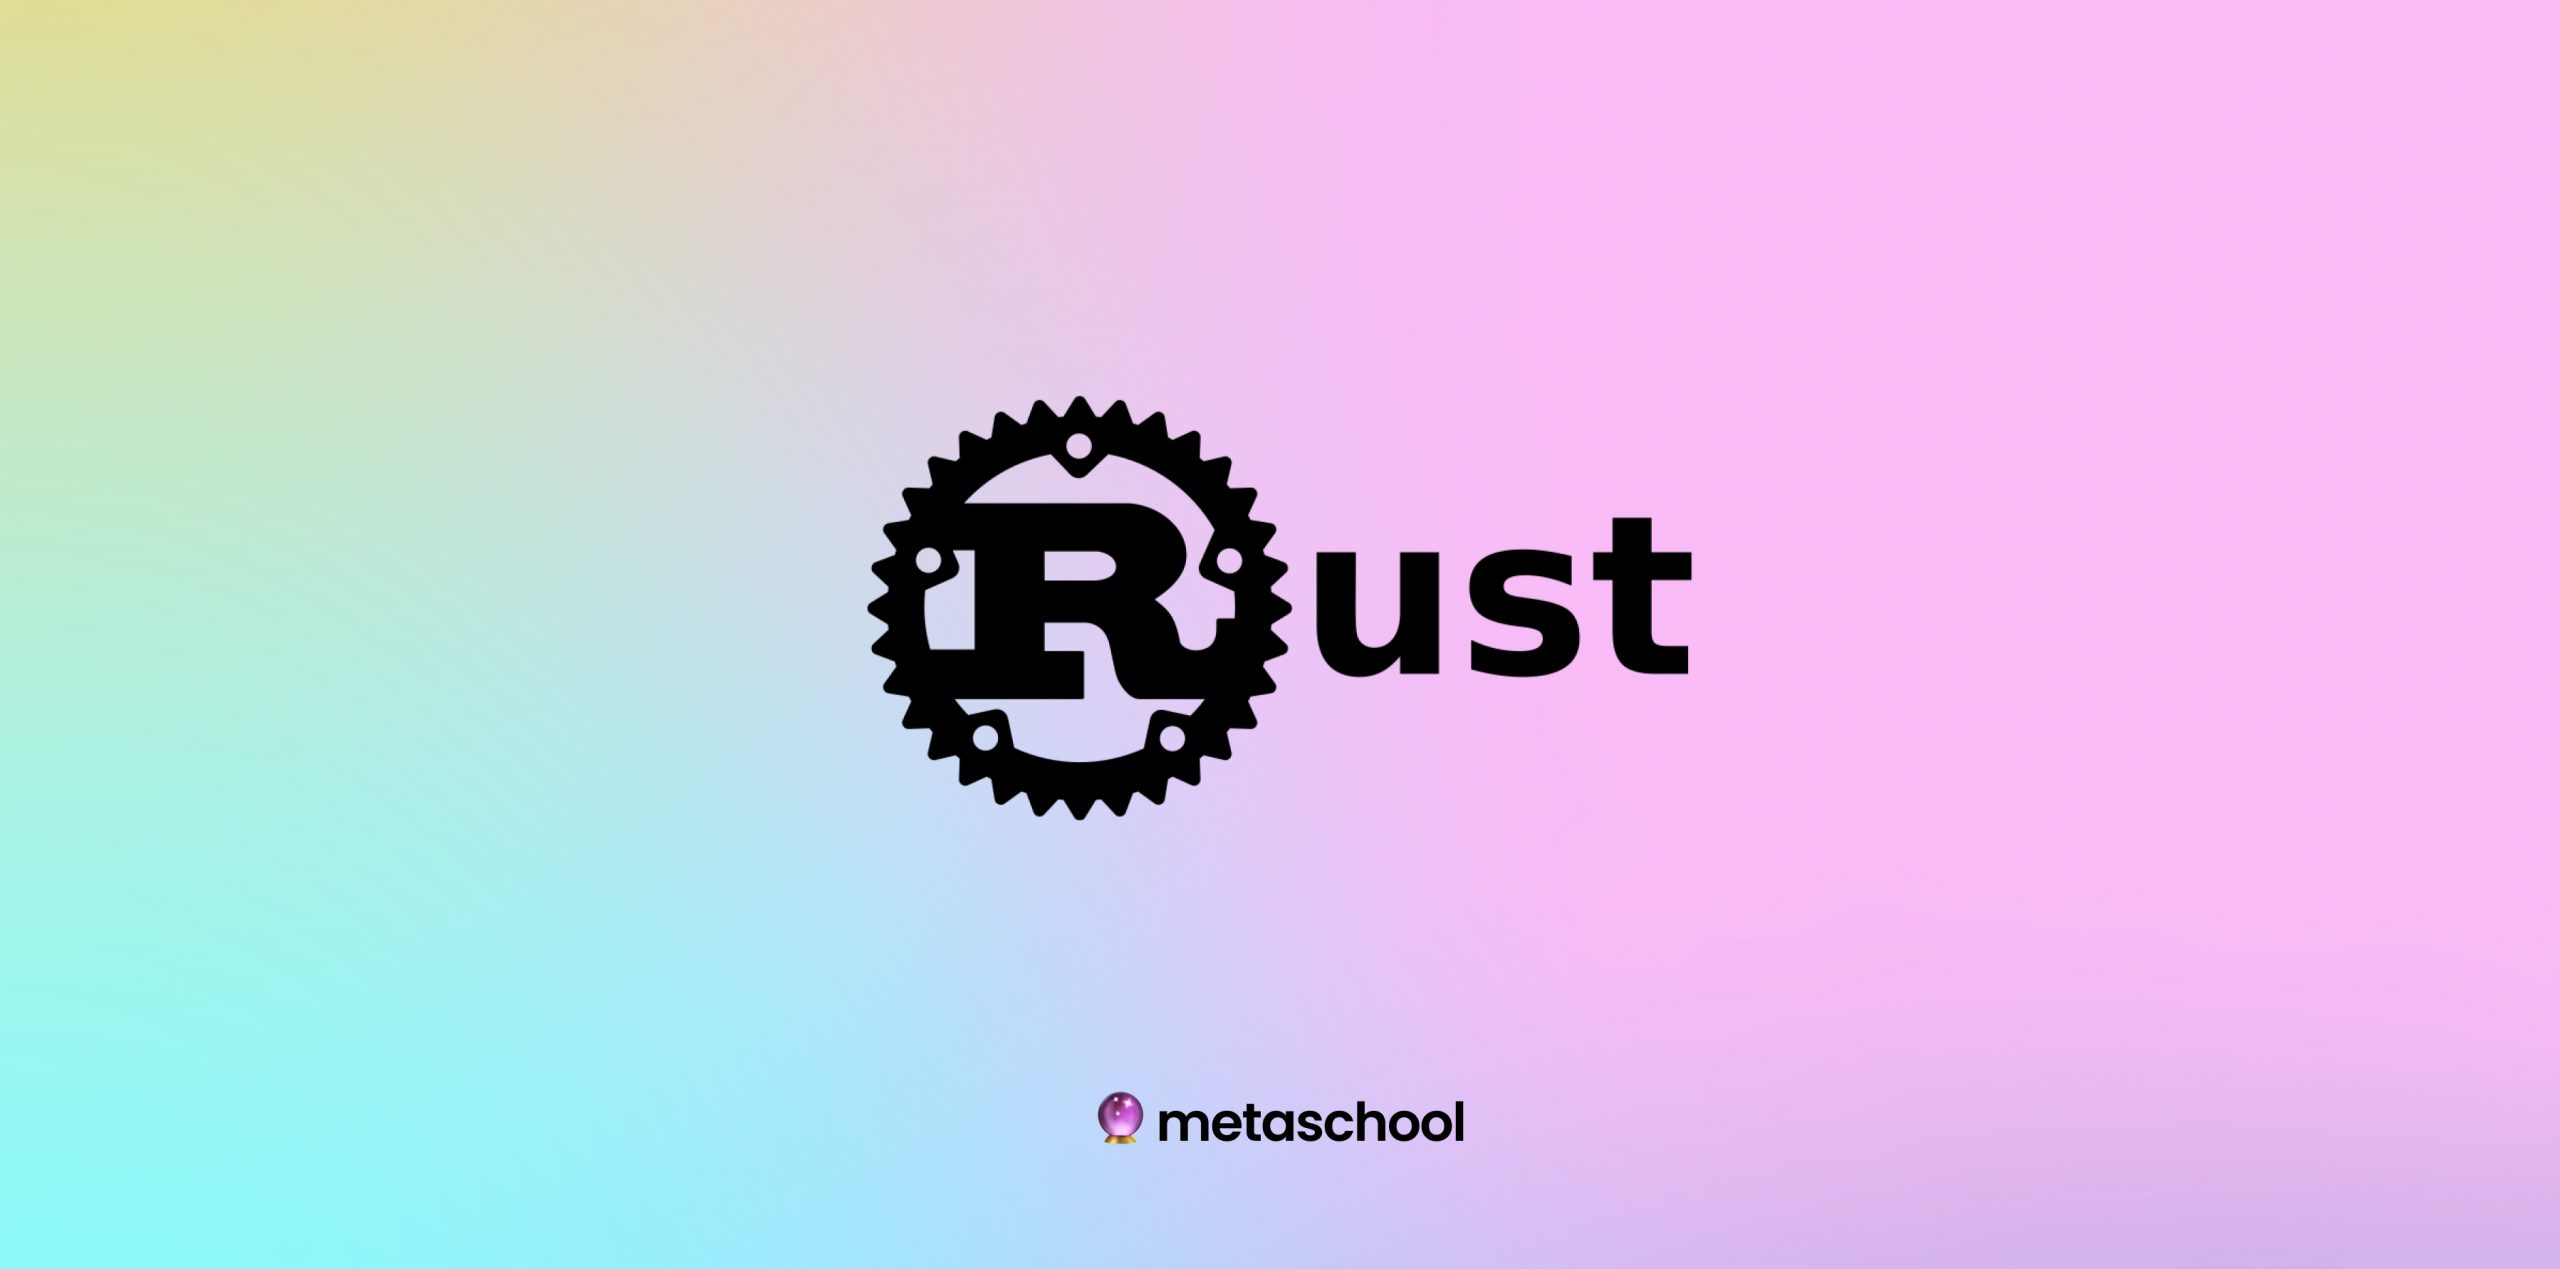 Why Rust is the most admired language among developers - The